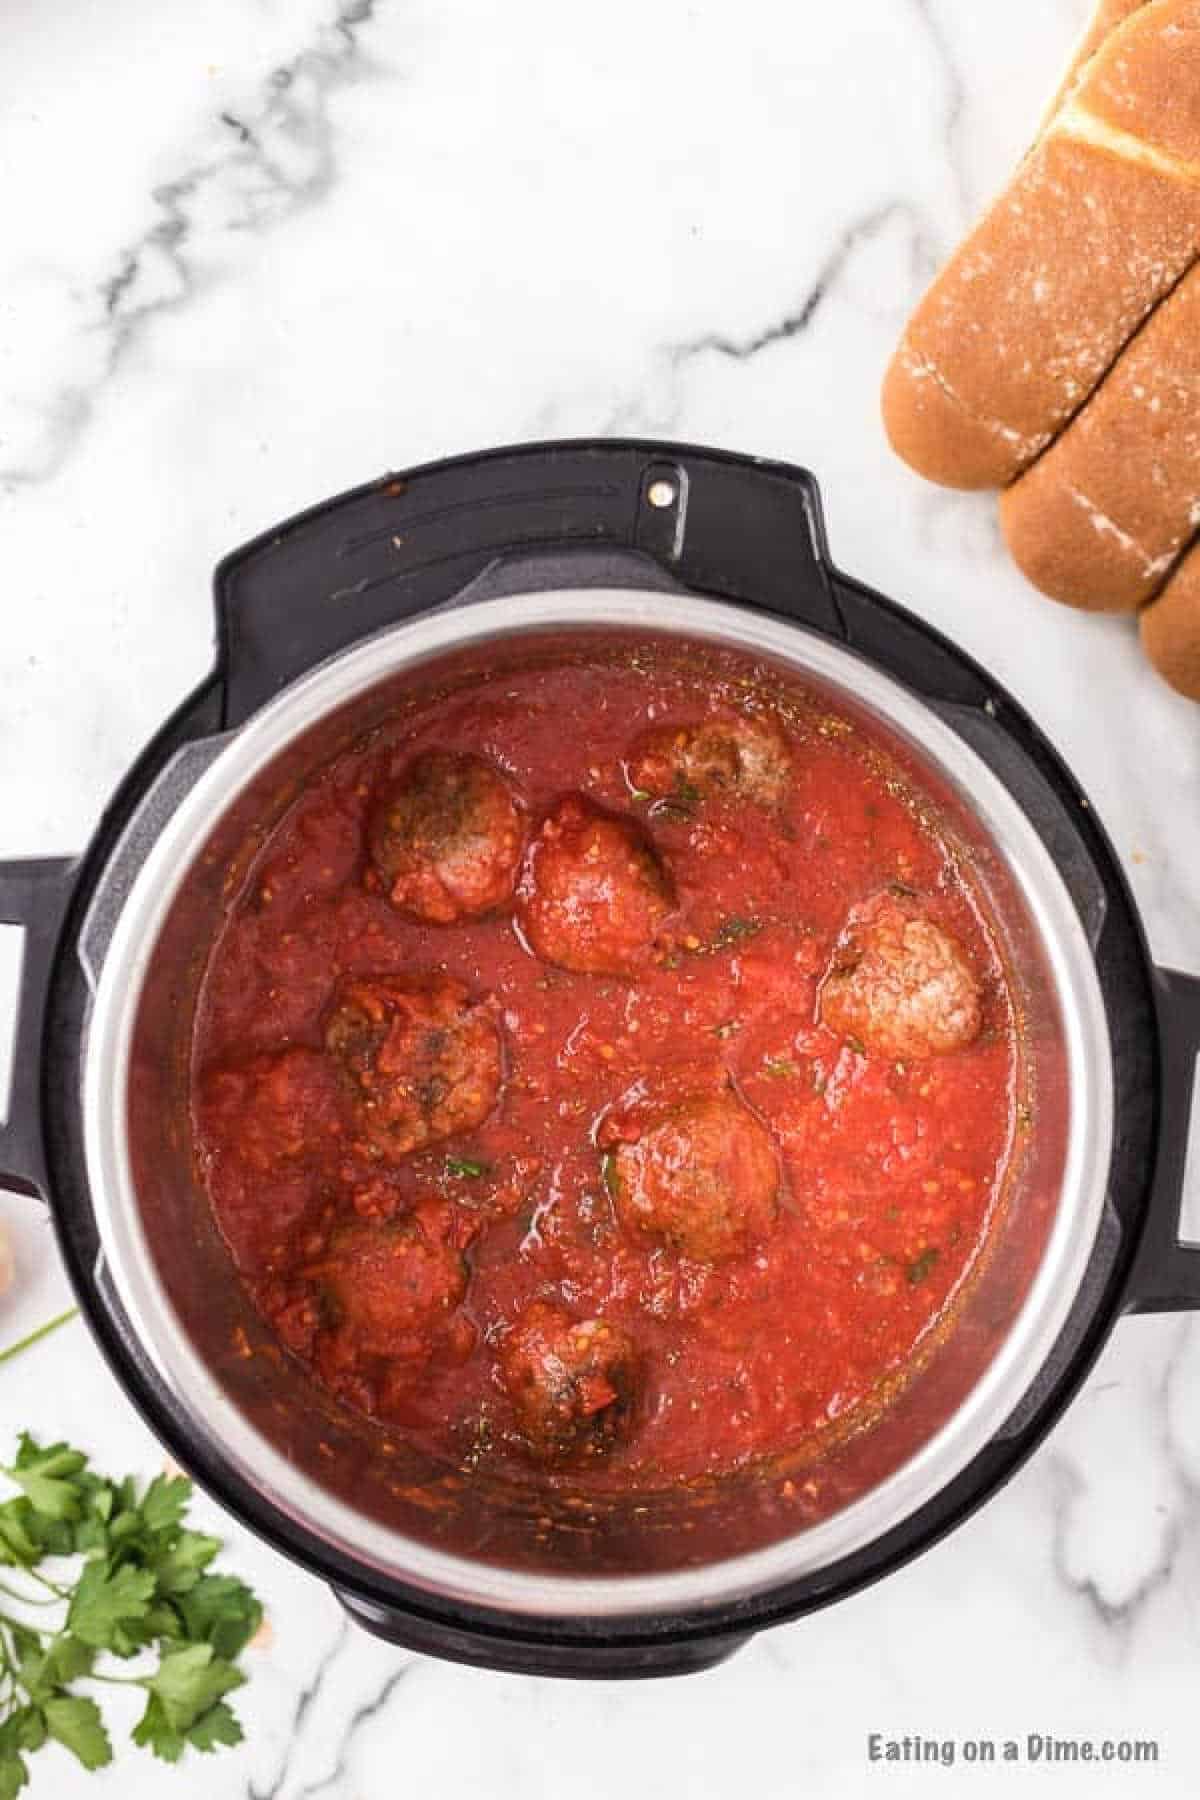 Meatballs in instant pot topped with sauce mixture